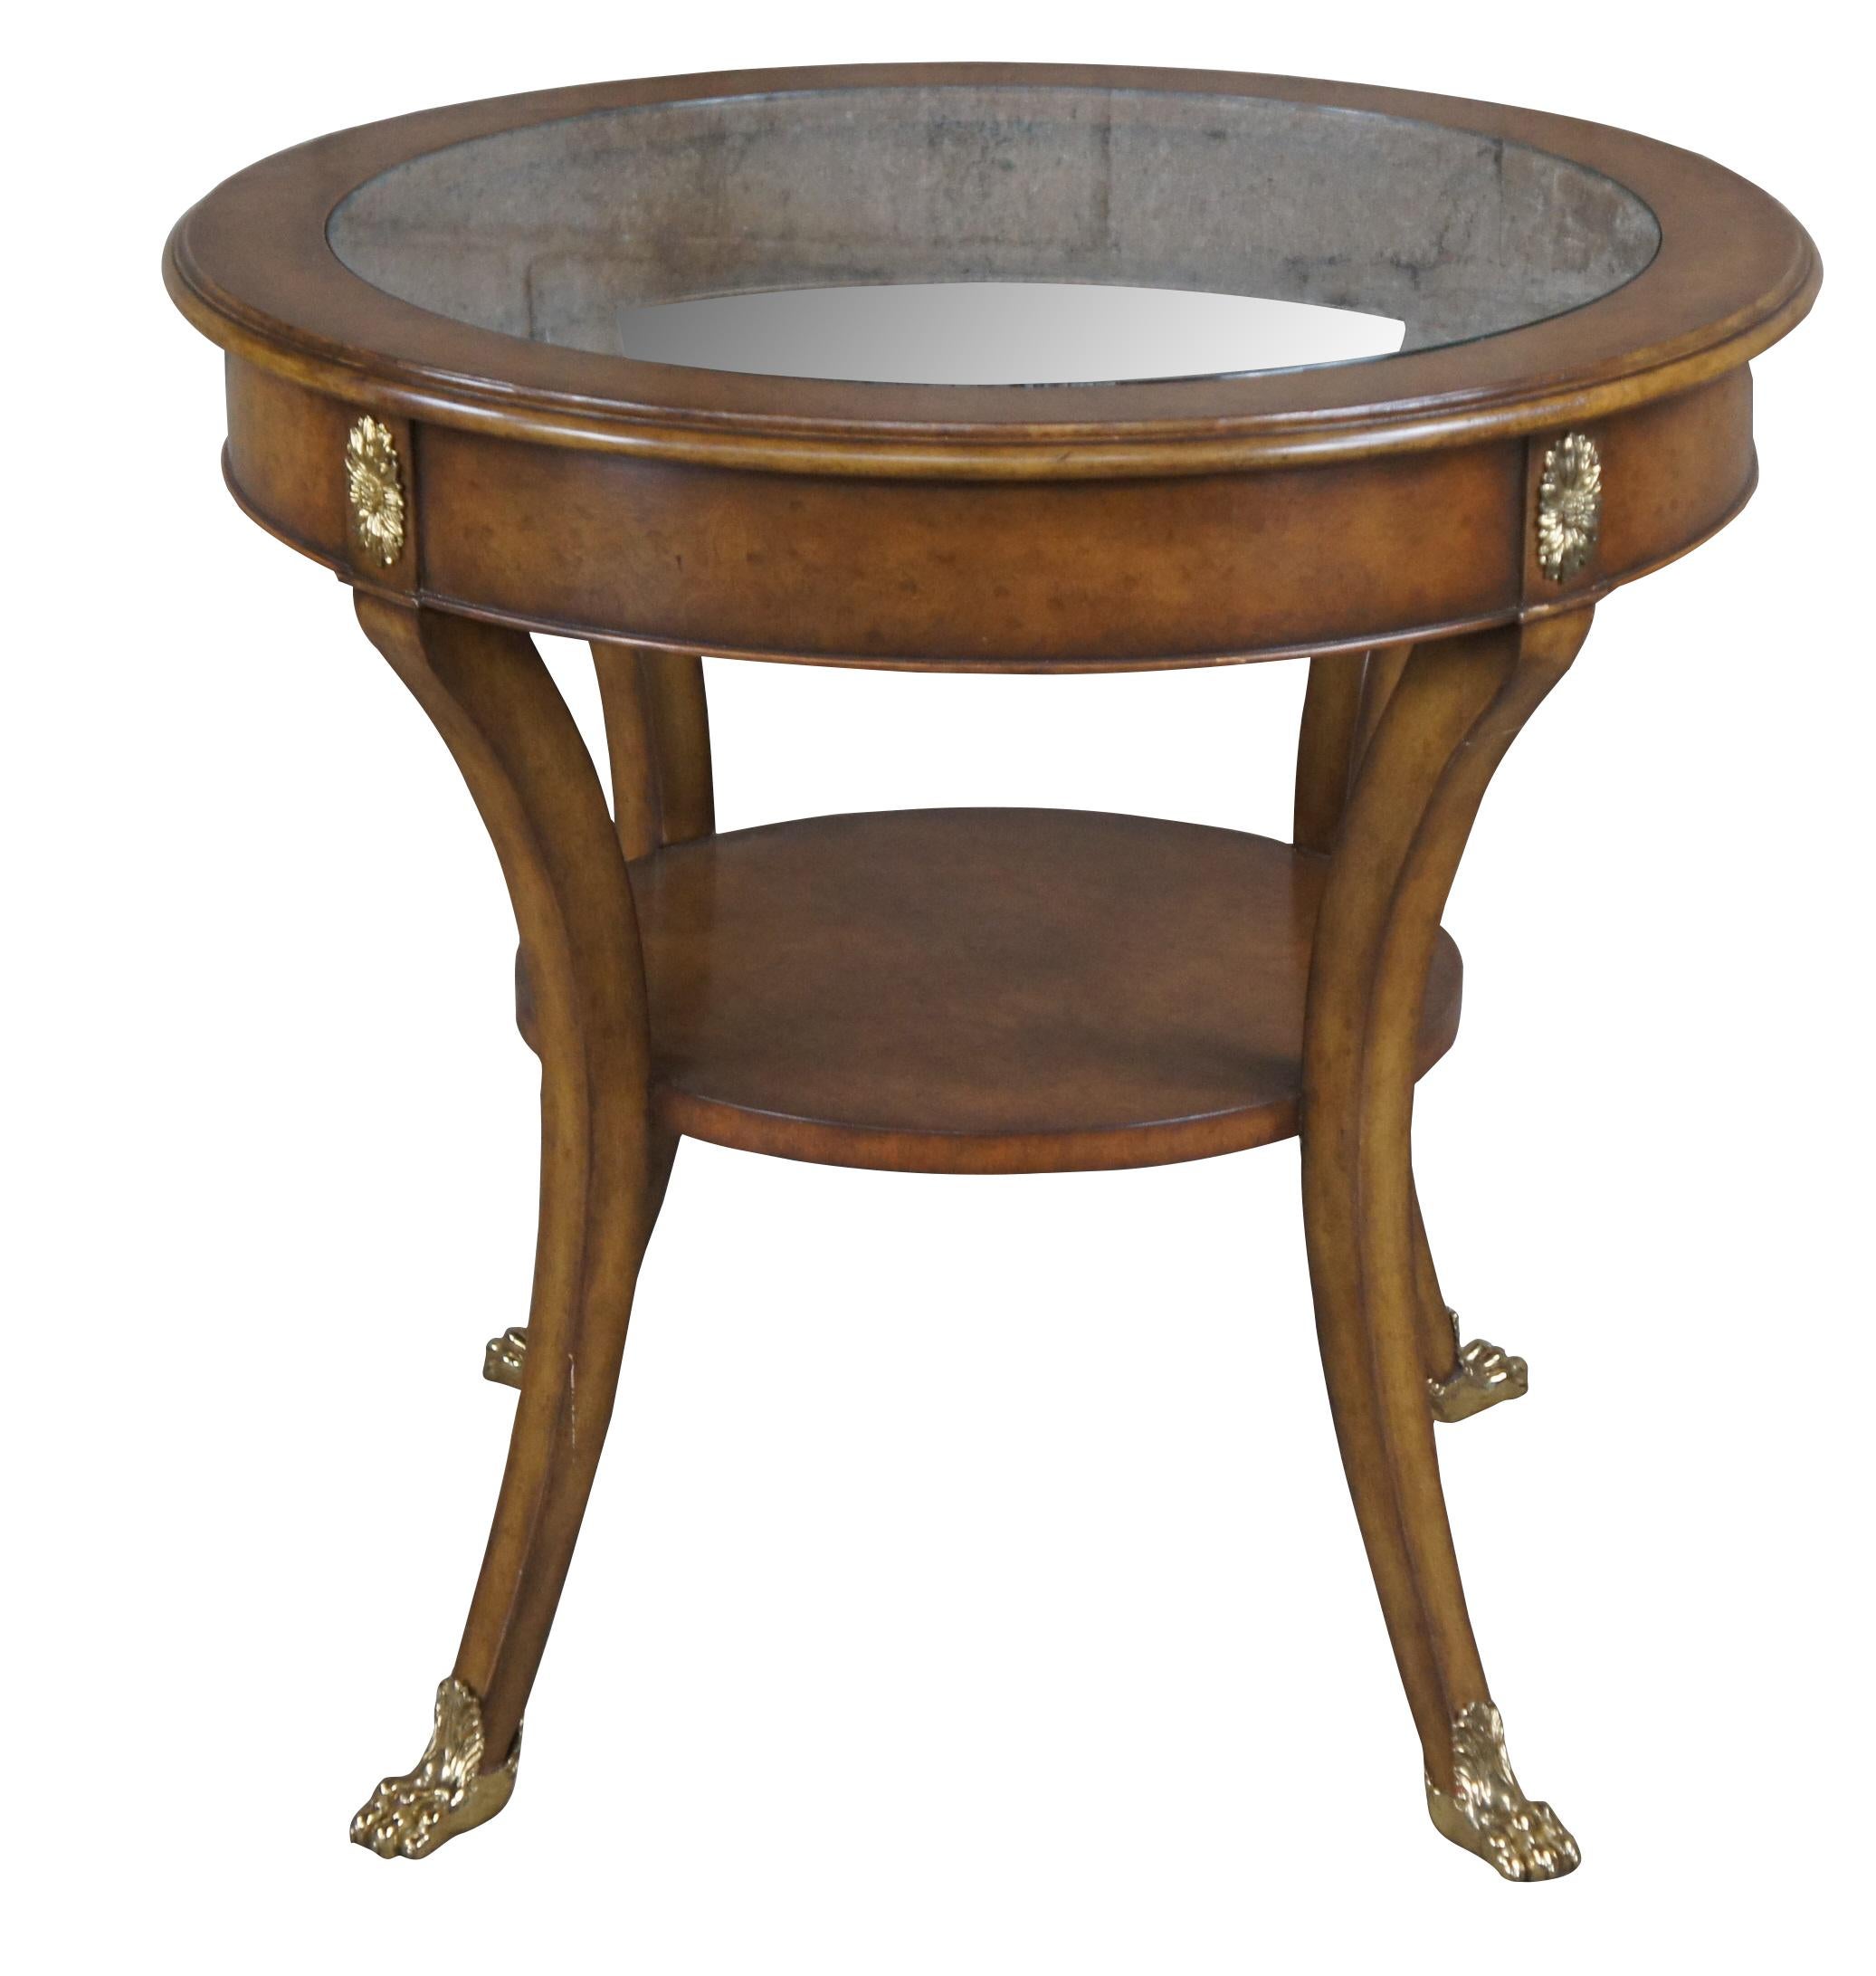 Vintage Maitland Smith gueridon accent table.  Features a round form made of burled walnut feautring glass top, two tiers and downswept legs with brass claw feet.  The apron is accented by brass ormolu medallions.  

Dimensions:
28